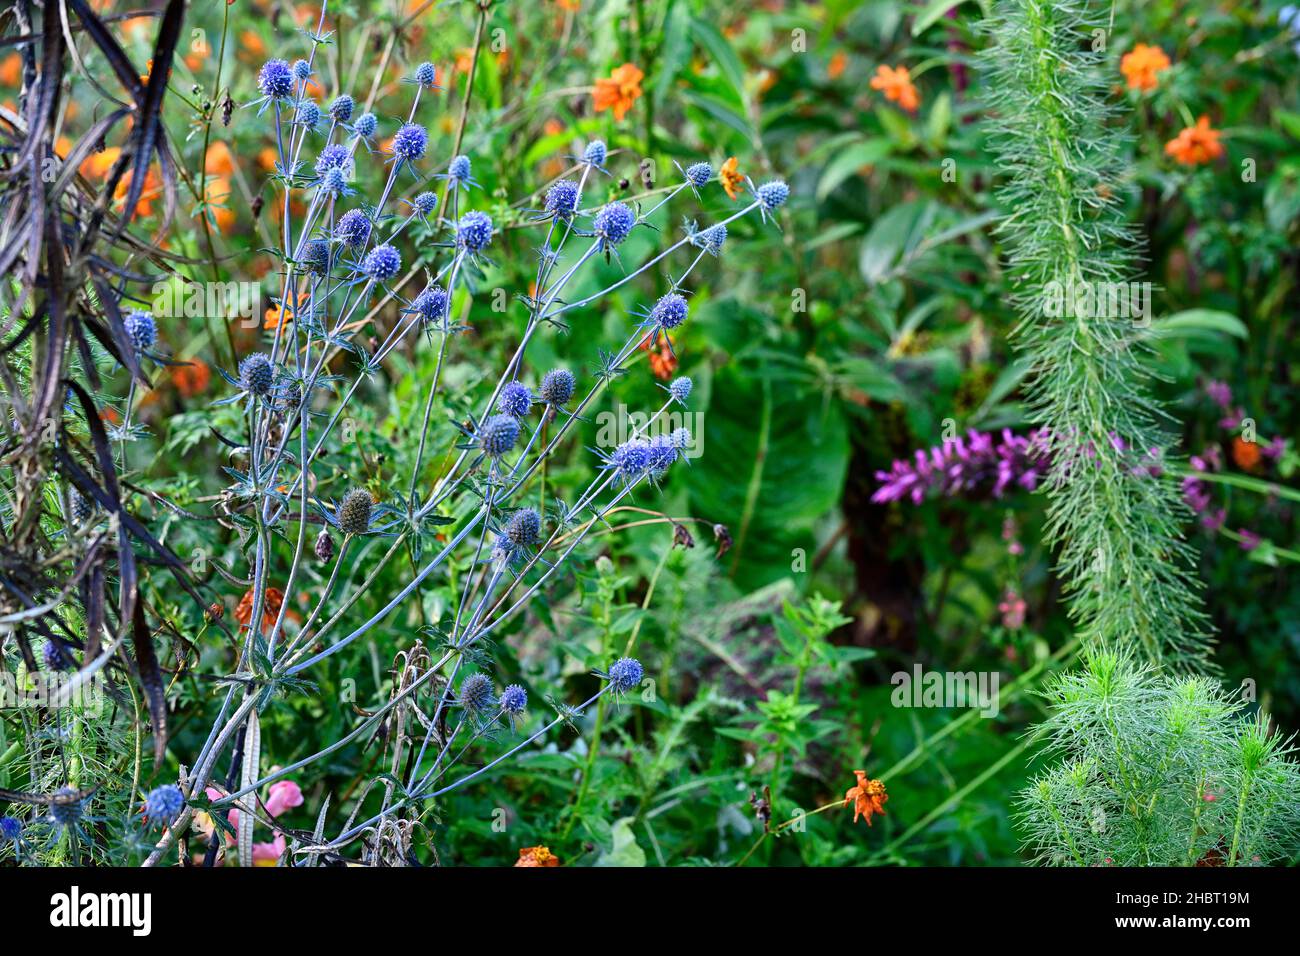 eryngium tripartitum,sea holly,sea hollies,blue flower,blue flowers,flowering,cosmos tango in background,blue and orange flowers,RM Floral Stock Photo